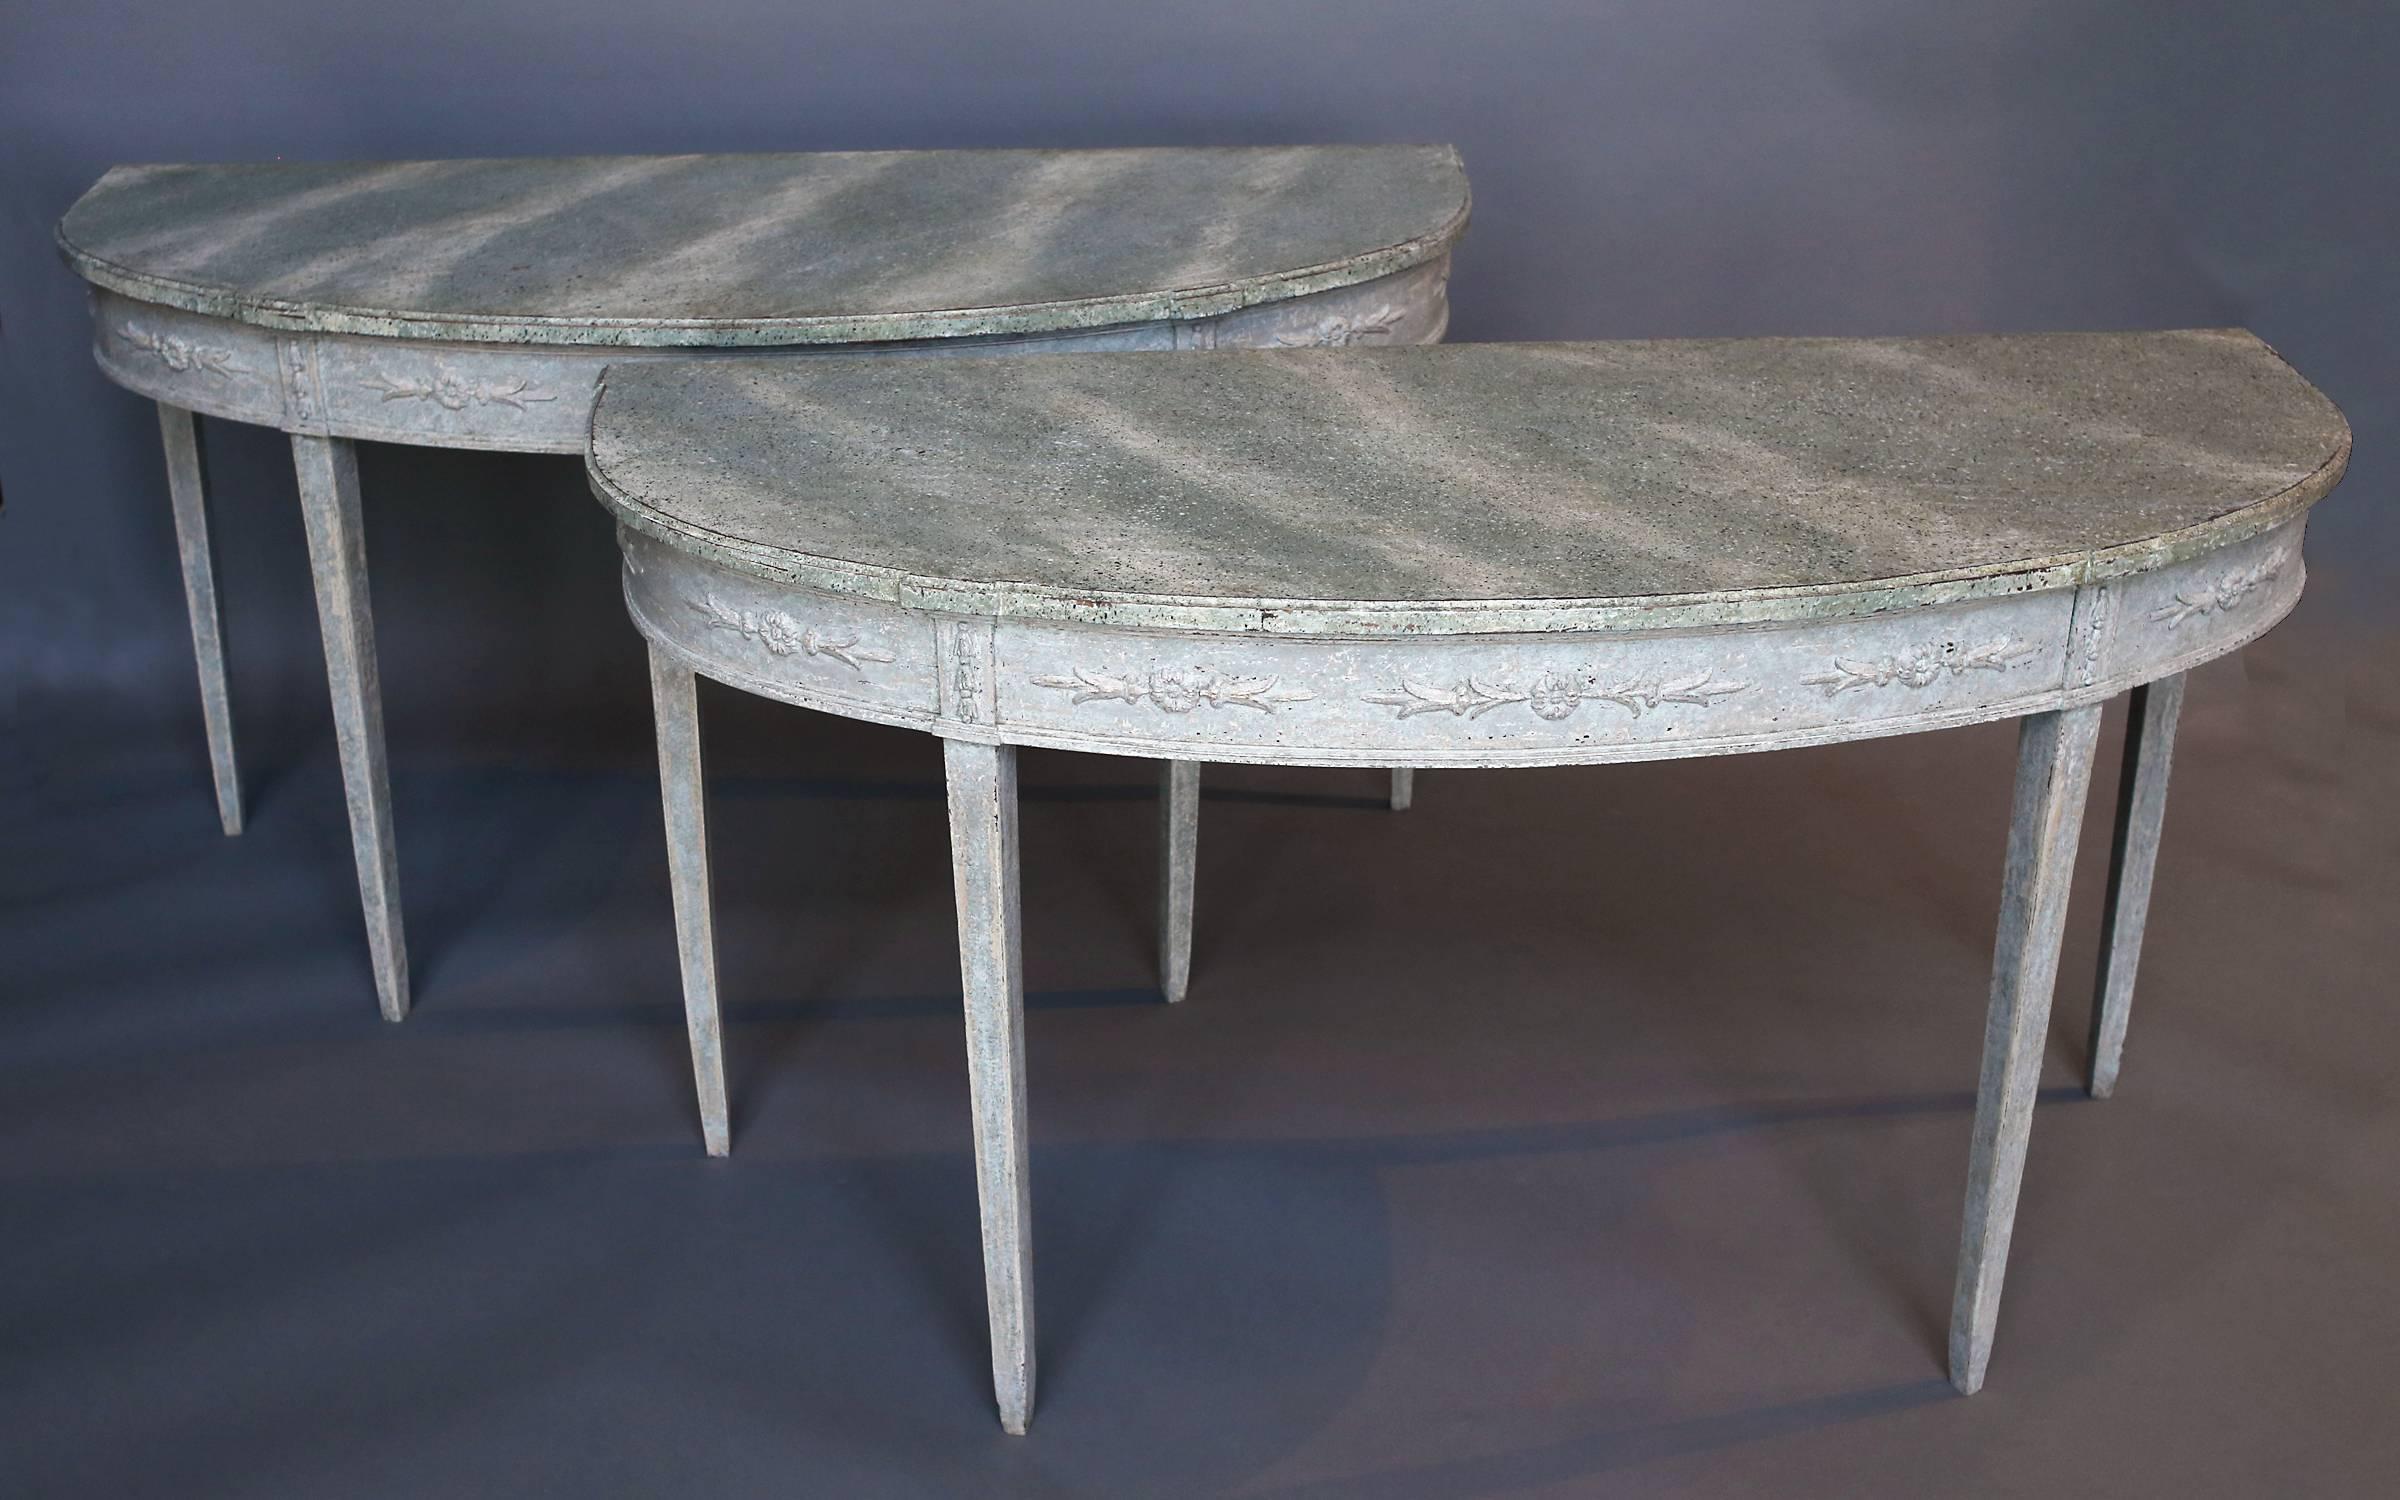 Rare pair of period Gustavian console tables, Sweden, circa 1780, with marbleized tops. Wide aprons are decorated with applied floral carvings above simple, tapering legs. Original paint, including the marbleized tops.